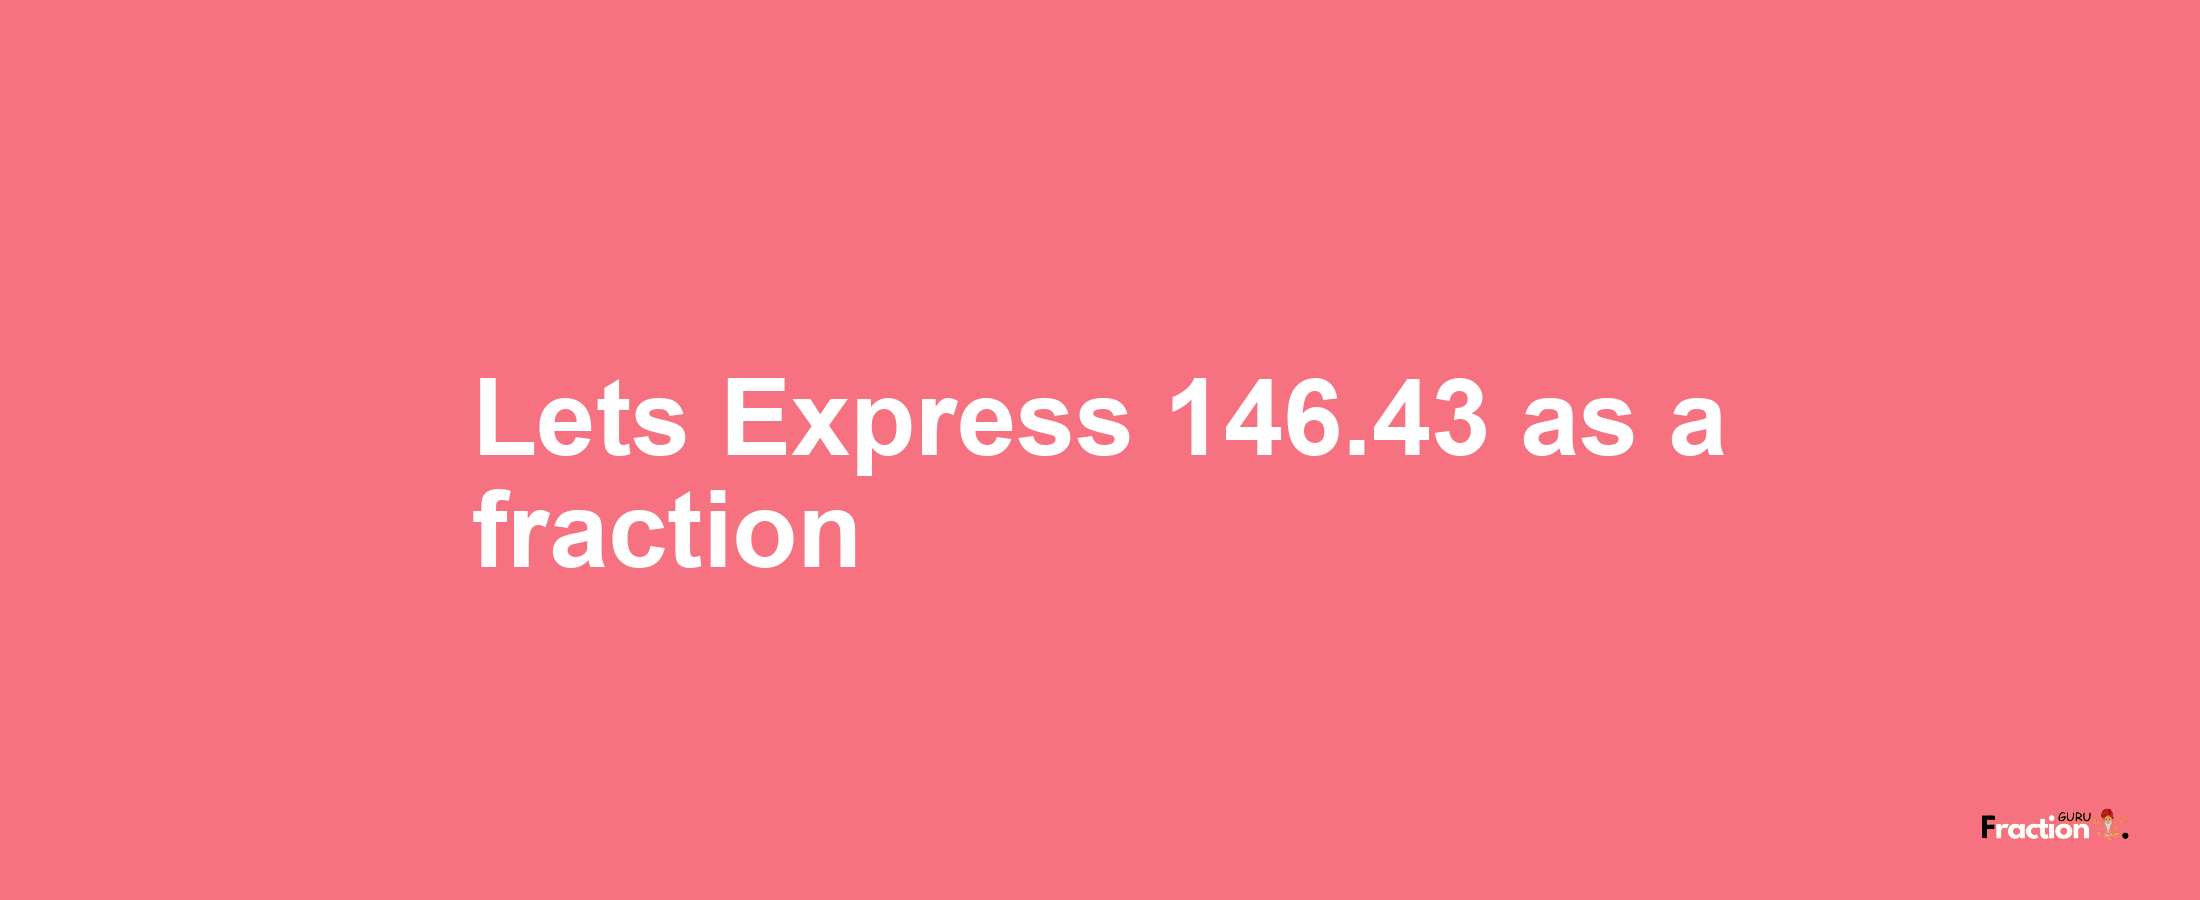 Lets Express 146.43 as afraction